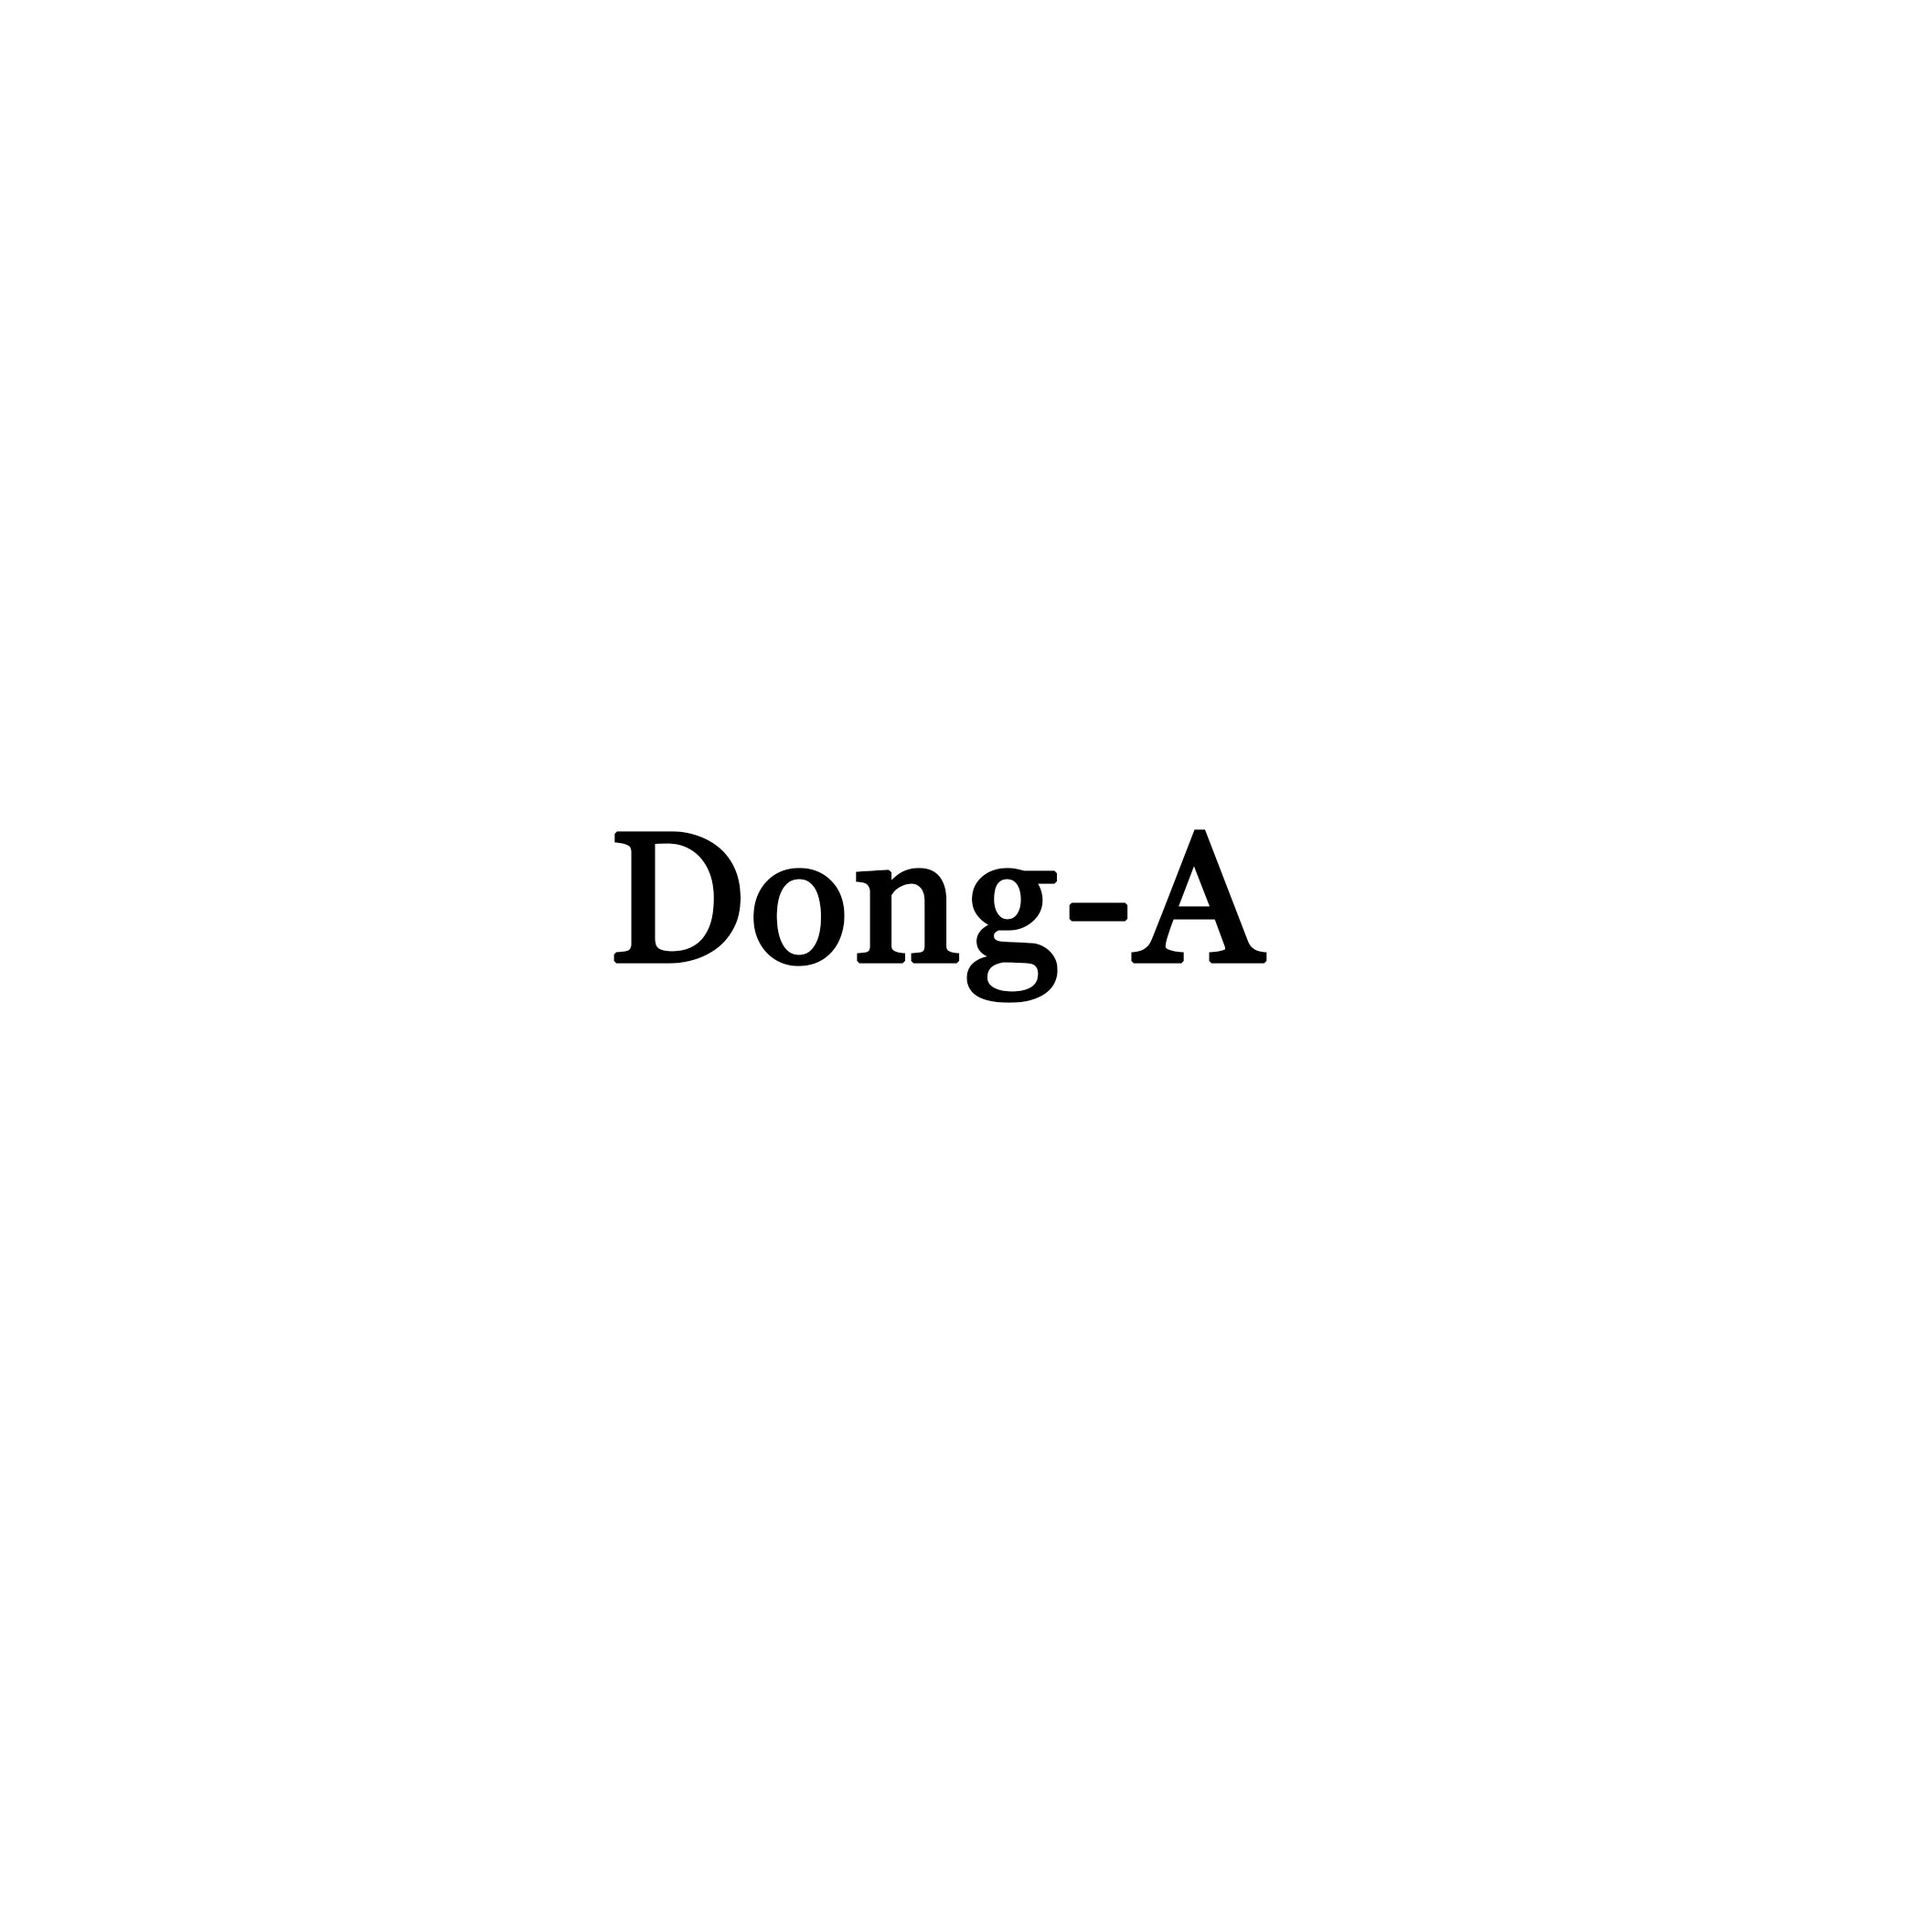 Product Brand: Dong-A